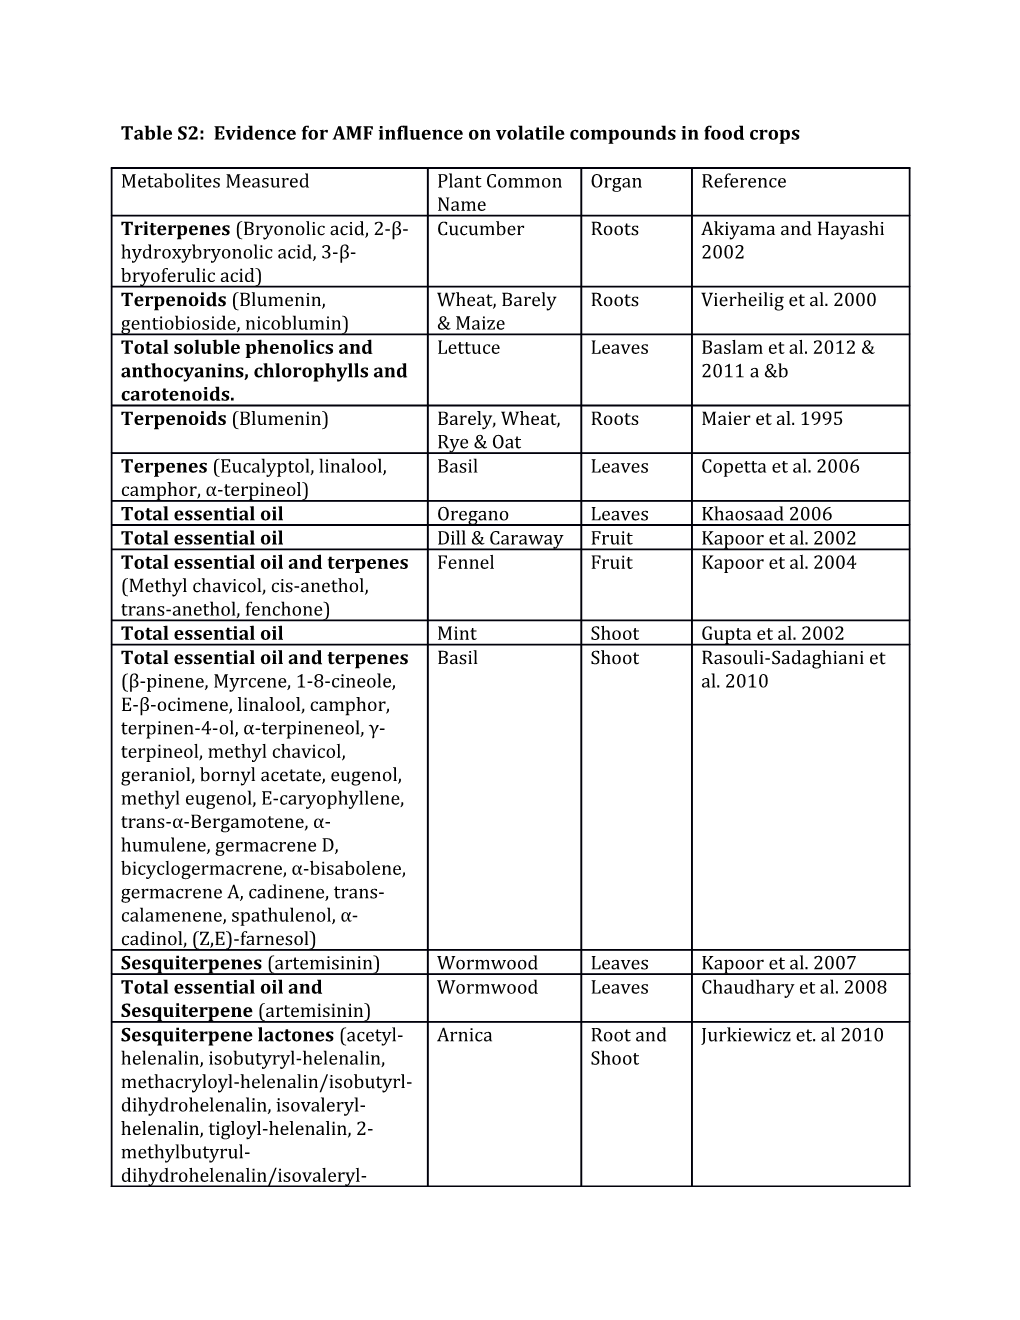 Table S2: Evidence for AMF Influence on Volatile Compounds in Food Crops